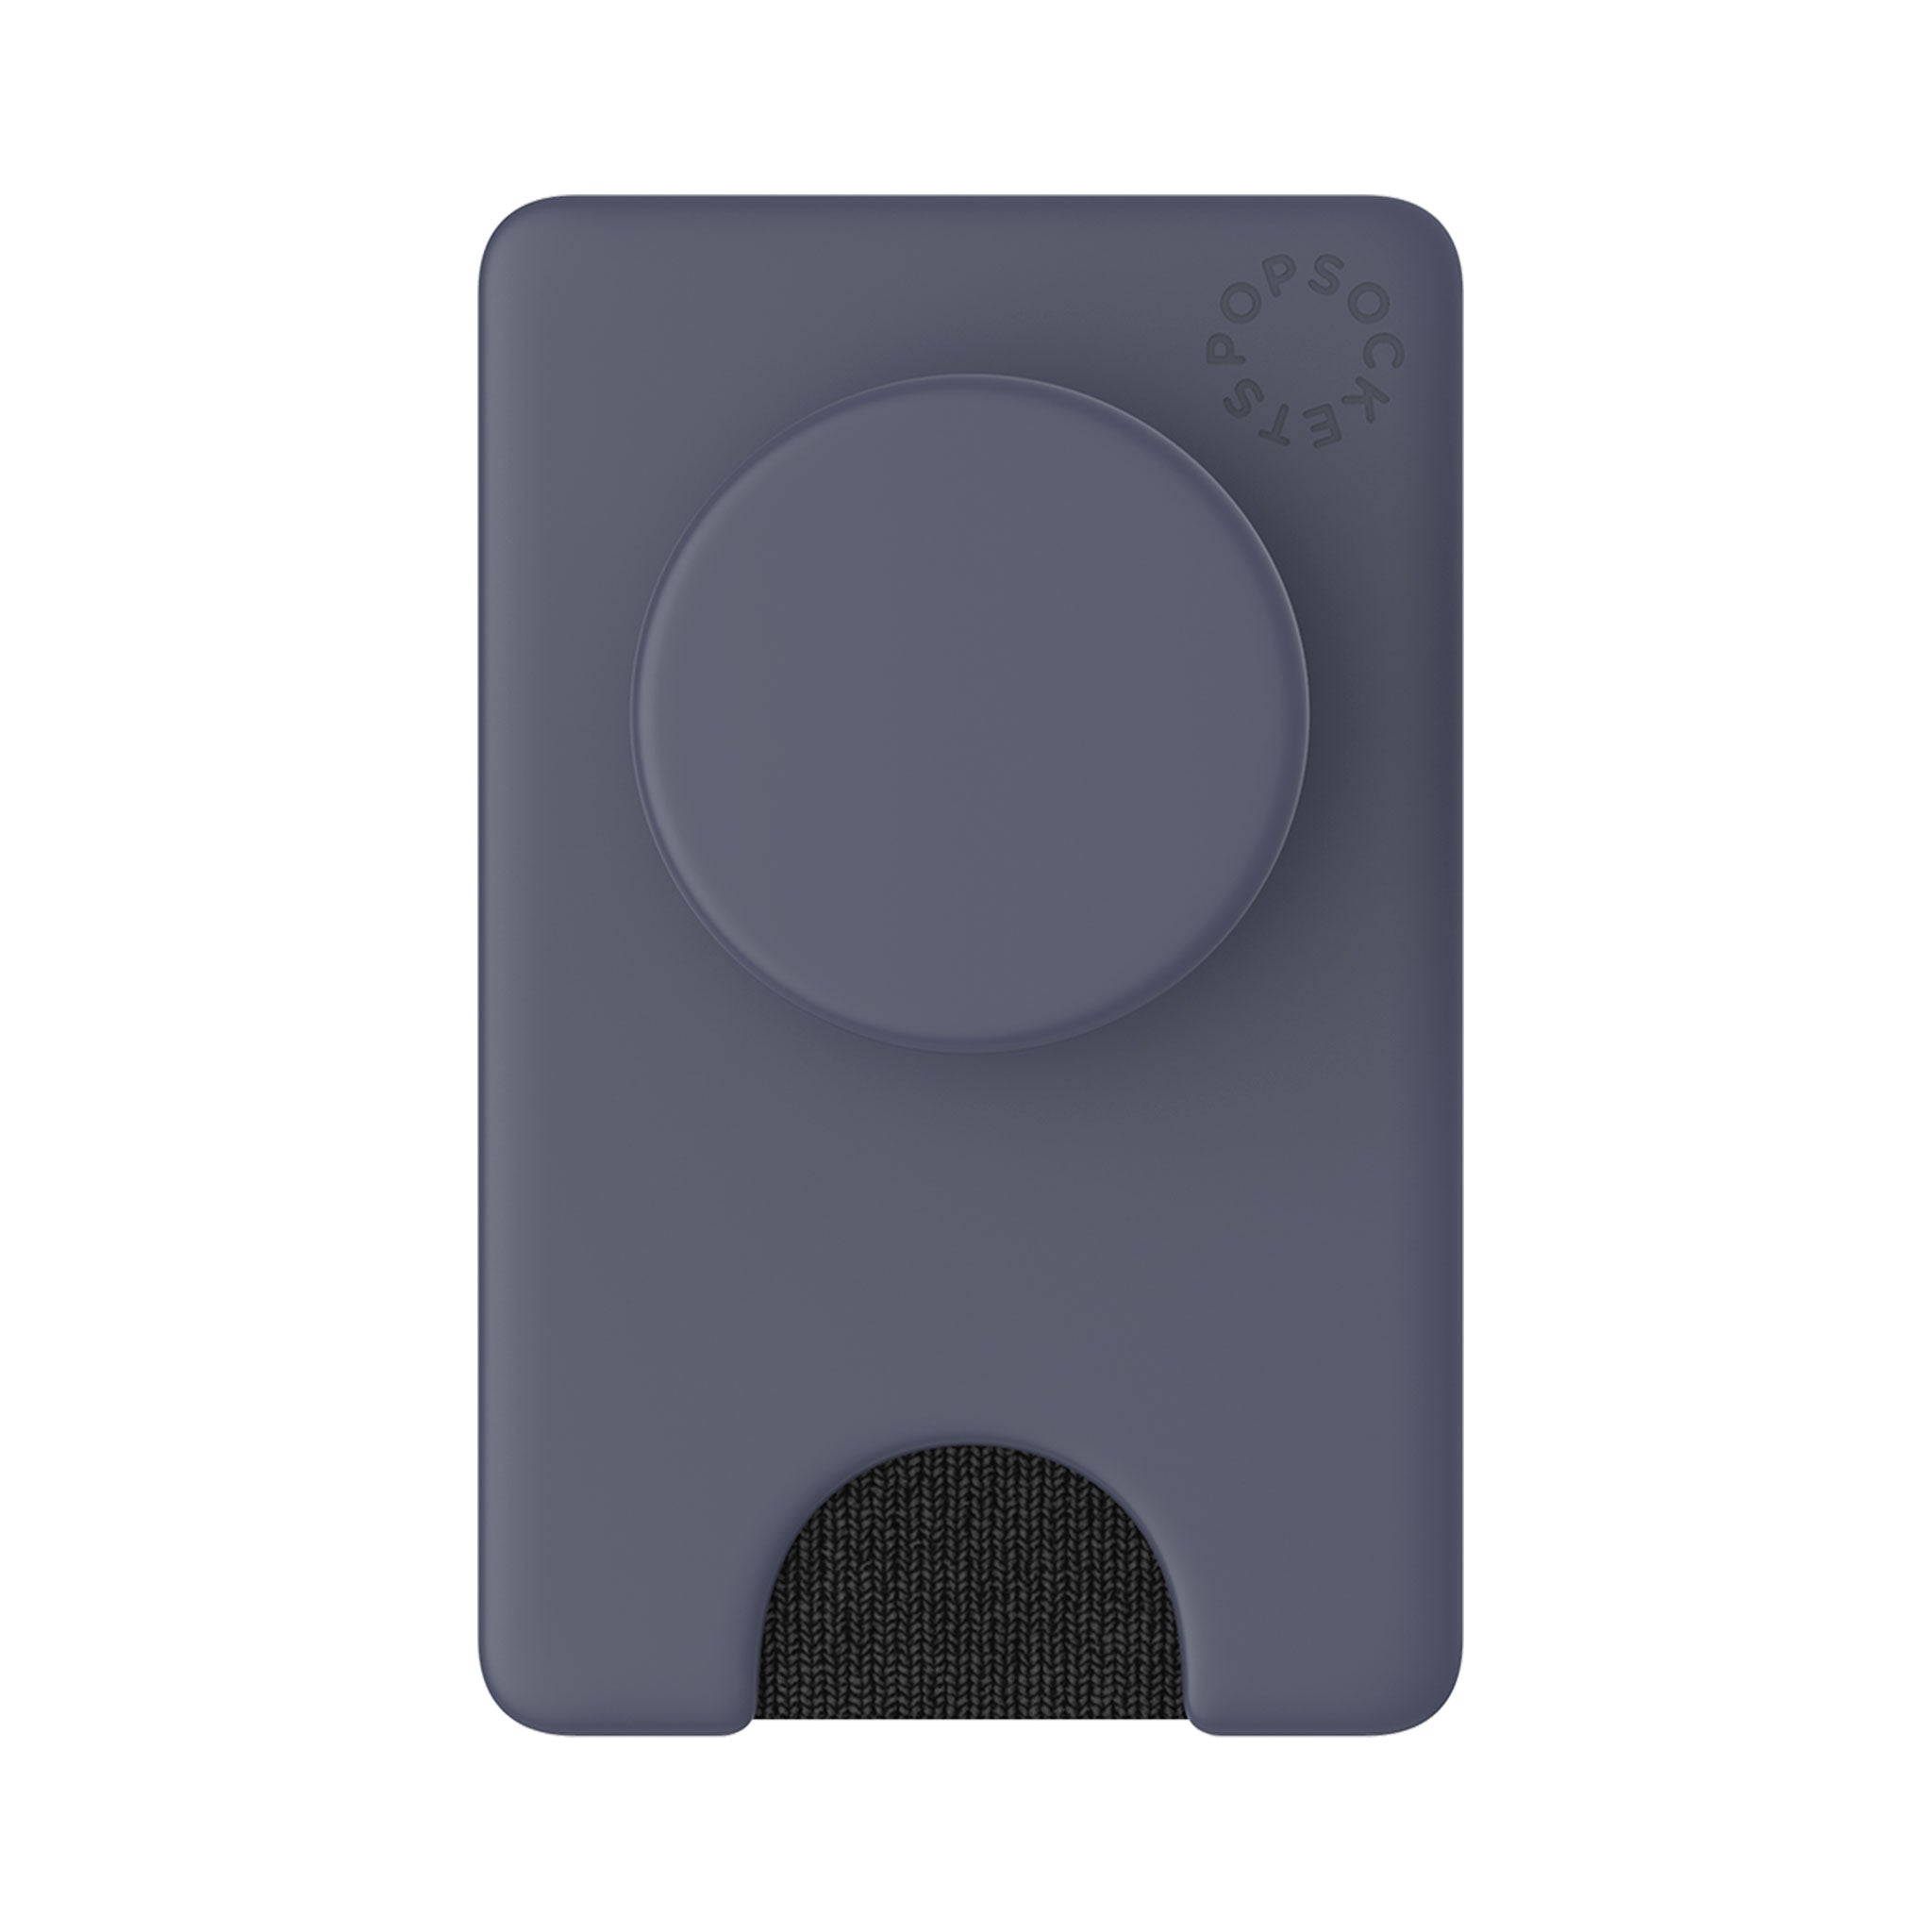 Popsockets - Popwallet Plus With Popgrip - Shadow Blue